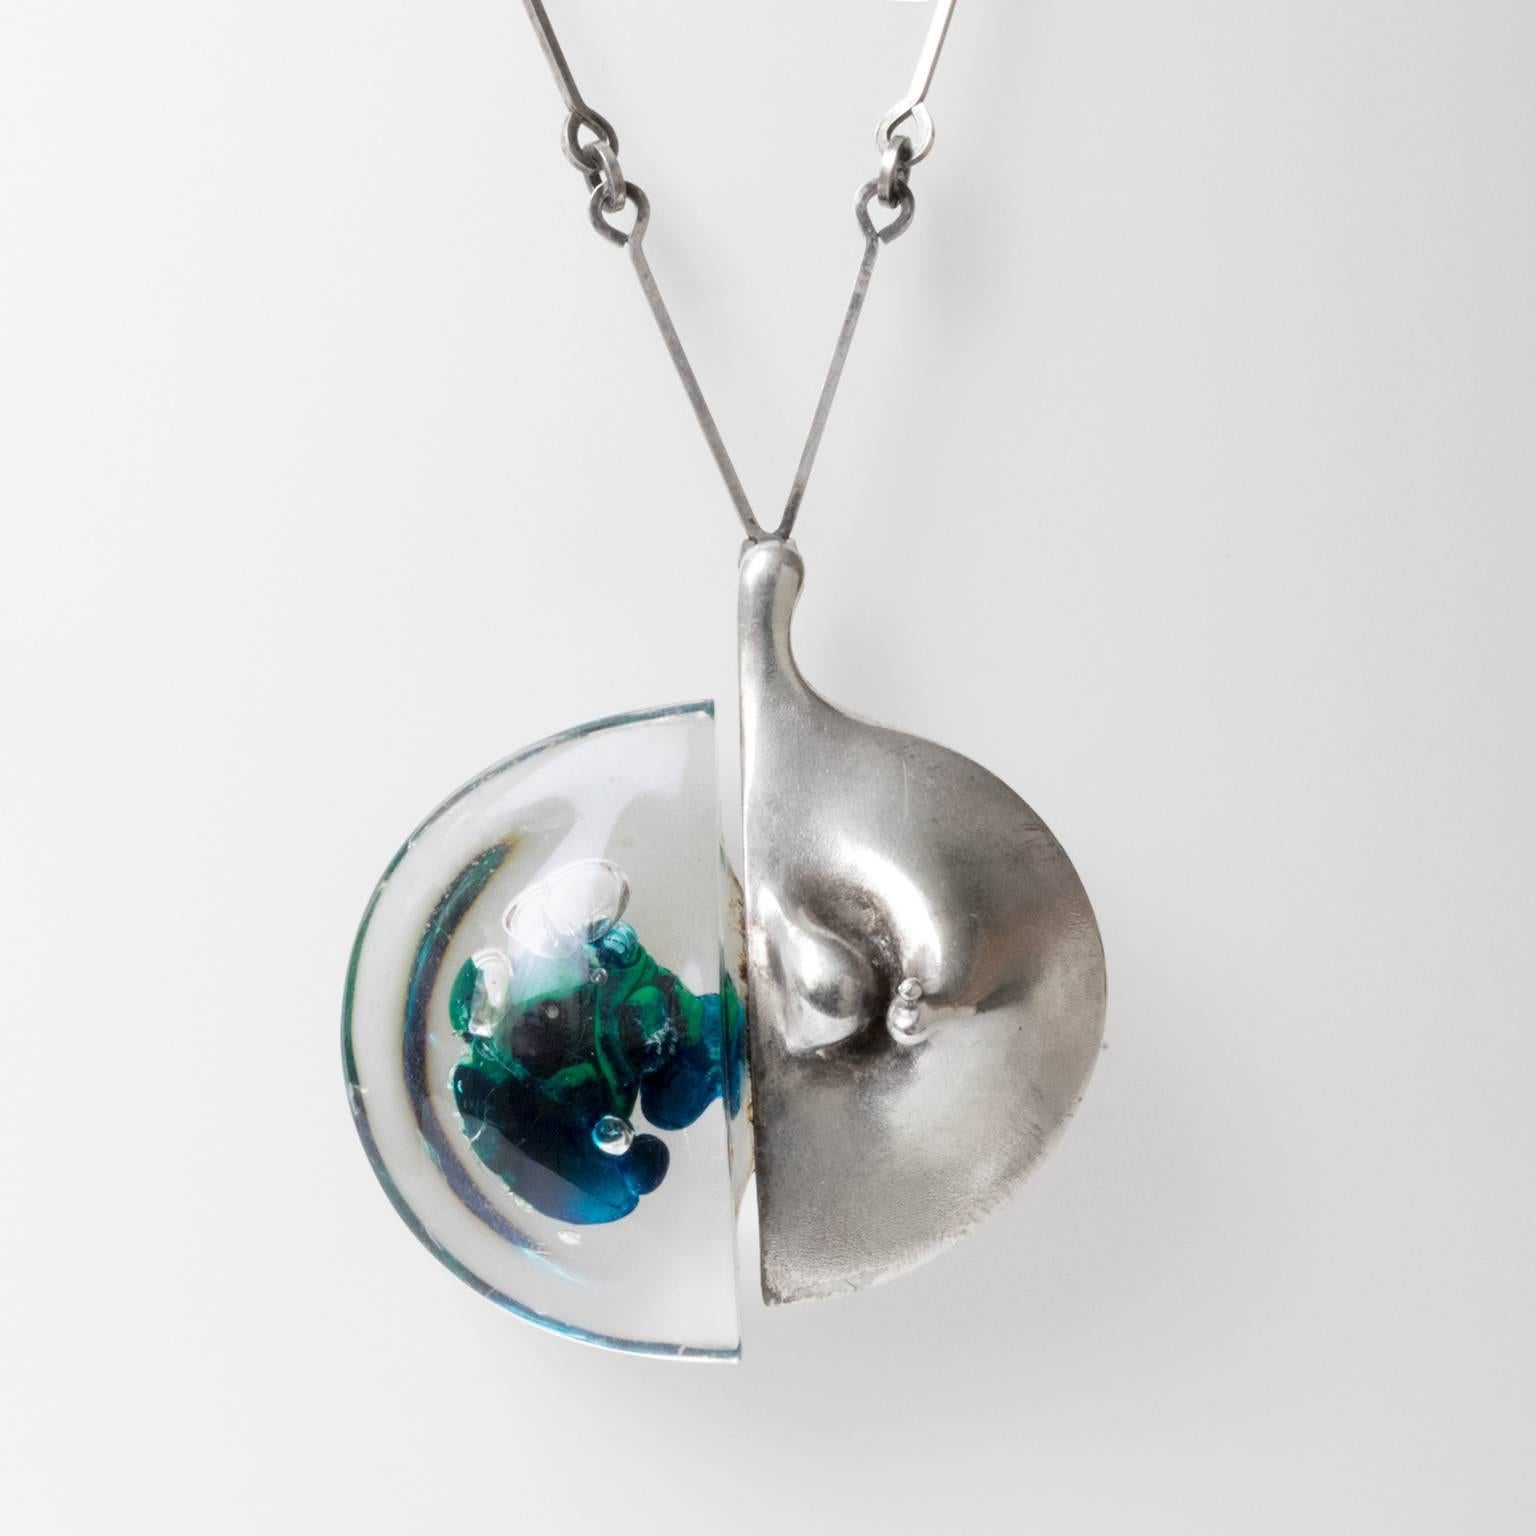 Scandinavian Modern Bjorn Weckstrom "Kilimanjaro" necklace and pendant in silver and acrylic. Made at Lapponia, Finland, 1970s.
Width 2.5".
Pendant height: 2.75".
Chain height: 26".